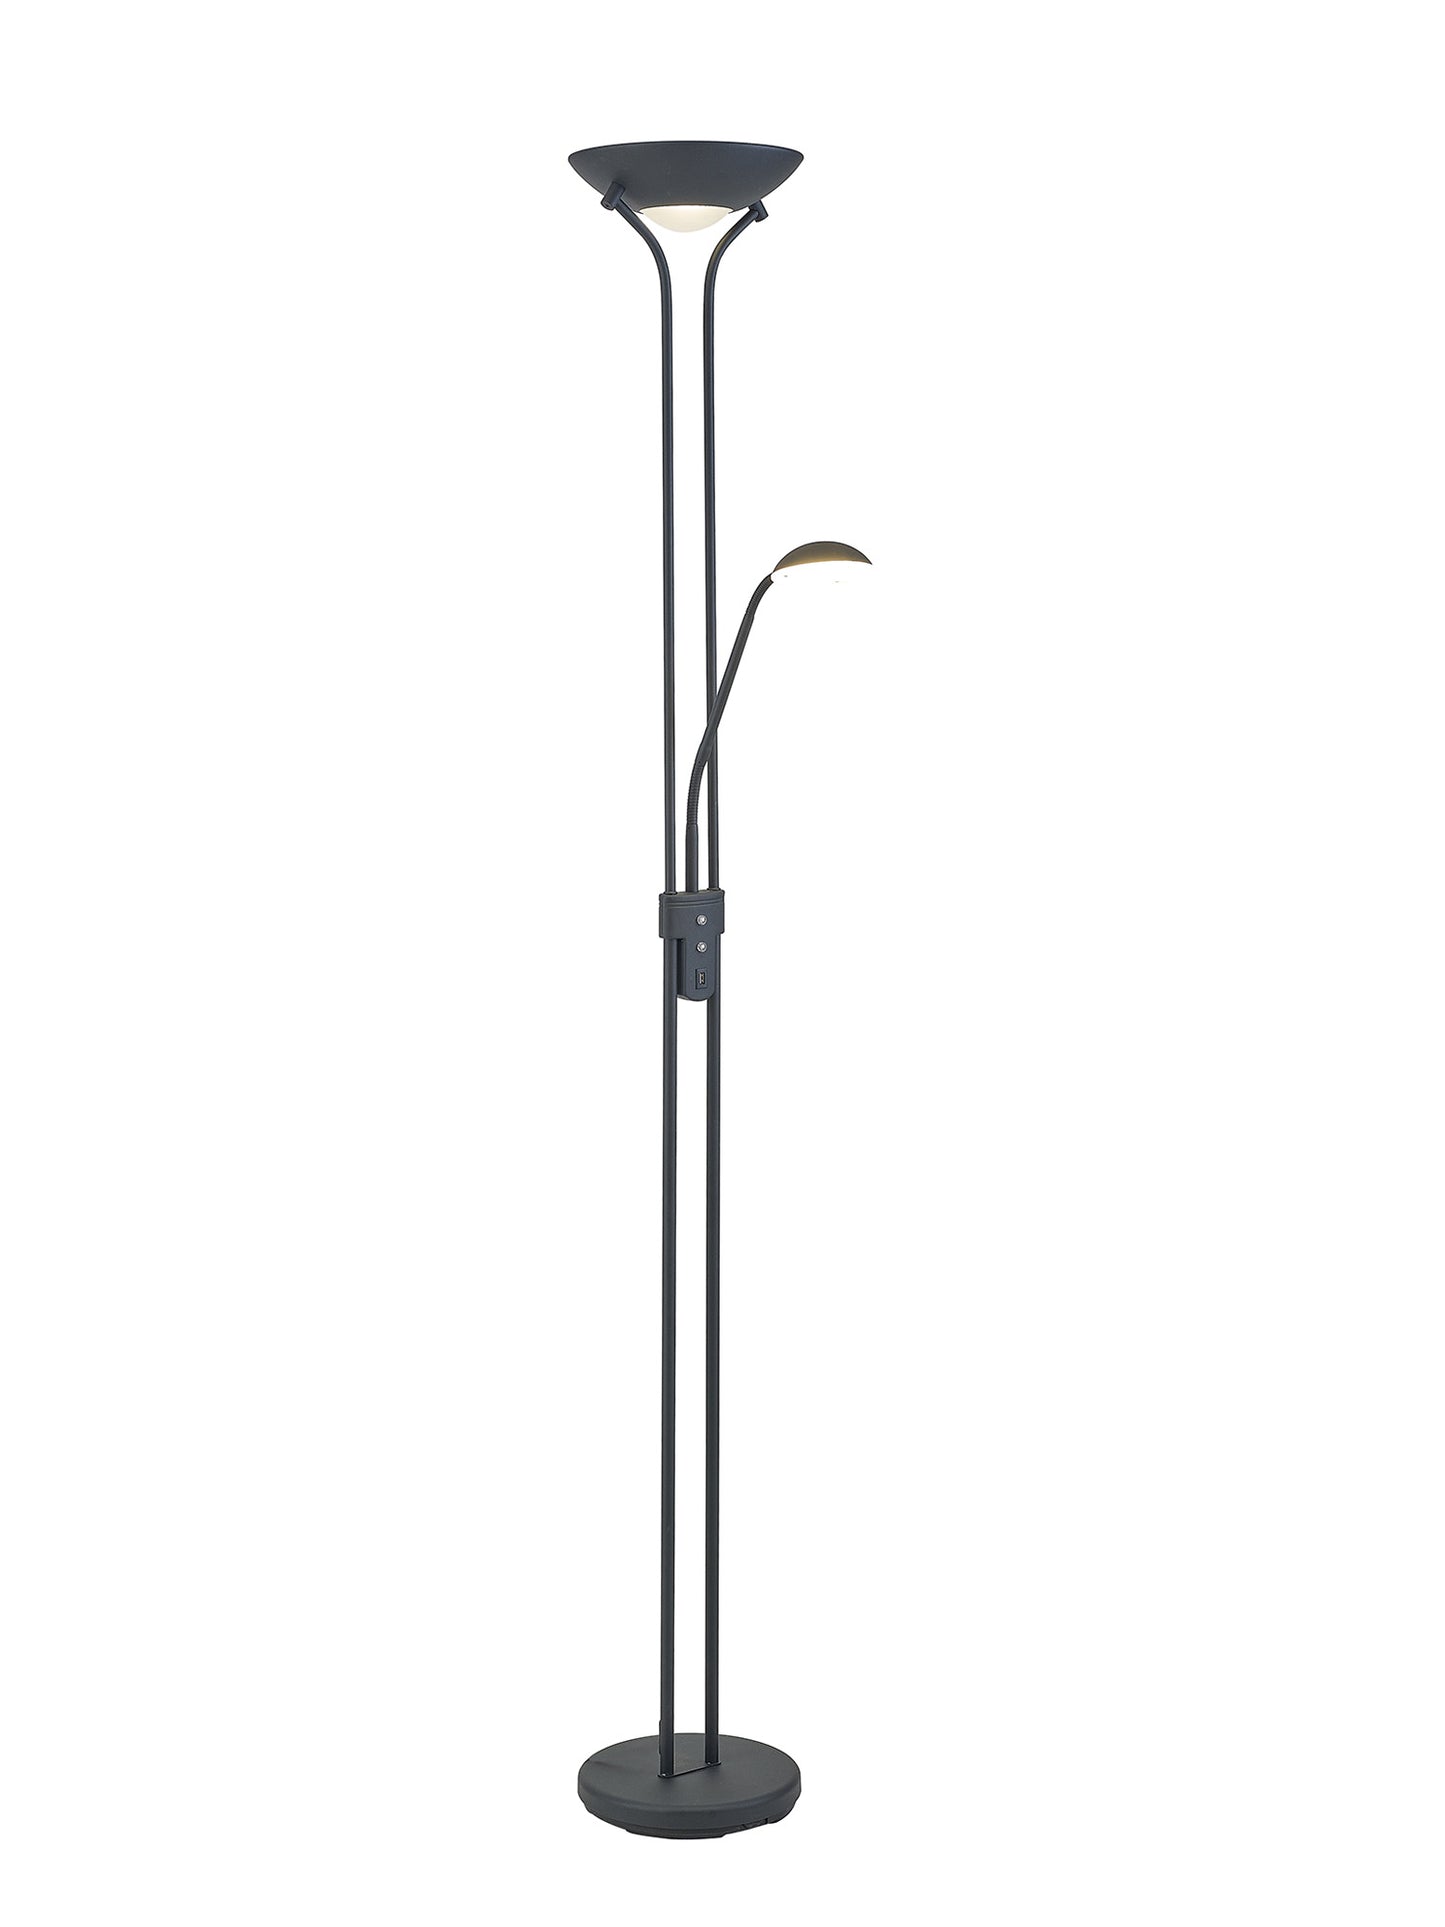 Brazier 2 Light Floor Lamp With USB 2.1 mAh Socket, 20+5W LED, 3000K Touch Dimmer, 2300lm, 3yrs Warranty